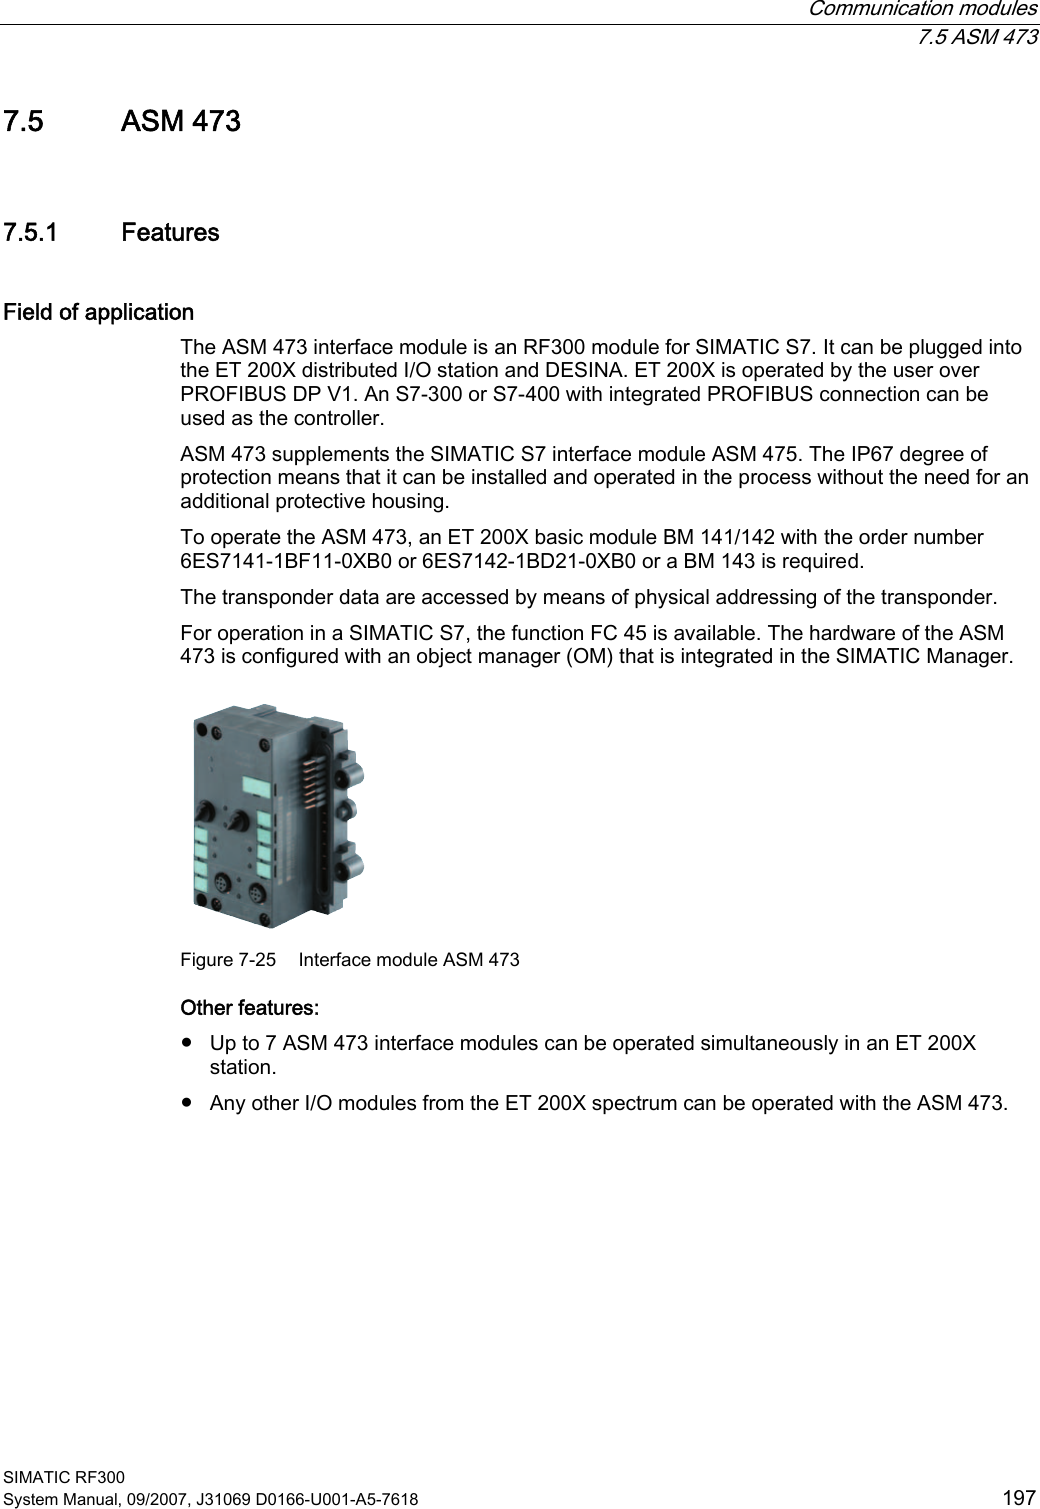  Communication modules  7.5 ASM 473 SIMATIC RF300 System Manual, 09/2007, J31069 D0166-U001-A5-7618  197 7.5 ASM 473 7.5.1 Features Field of application The ASM 473 interface module is an RF300 module for SIMATIC S7. It can be plugged into the ET 200X distributed I/O station and DESINA. ET 200X is operated by the user over PROFIBUS DP V1. An S7-300 or S7-400 with integrated PROFIBUS connection can be used as the controller.  ASM 473 supplements the SIMATIC S7 interface module ASM 475. The IP67 degree of protection means that it can be installed and operated in the process without the need for an additional protective housing. To operate the ASM 473, an ET 200X basic module BM 141/142 with the order number 6ES7141-1BF11-0XB0 or 6ES7142-1BD21-0XB0 or a BM 143 is required. The transponder data are accessed by means of physical addressing of the transponder. For operation in a SIMATIC S7, the function FC 45 is available. The hardware of the ASM 473 is configured with an object manager (OM) that is integrated in the SIMATIC Manager.  Figure 7-25  Interface module ASM 473 Other features: ●  Up to 7 ASM 473 interface modules can be operated simultaneously in an ET 200X station. ●  Any other I/O modules from the ET 200X spectrum can be operated with the ASM 473. 